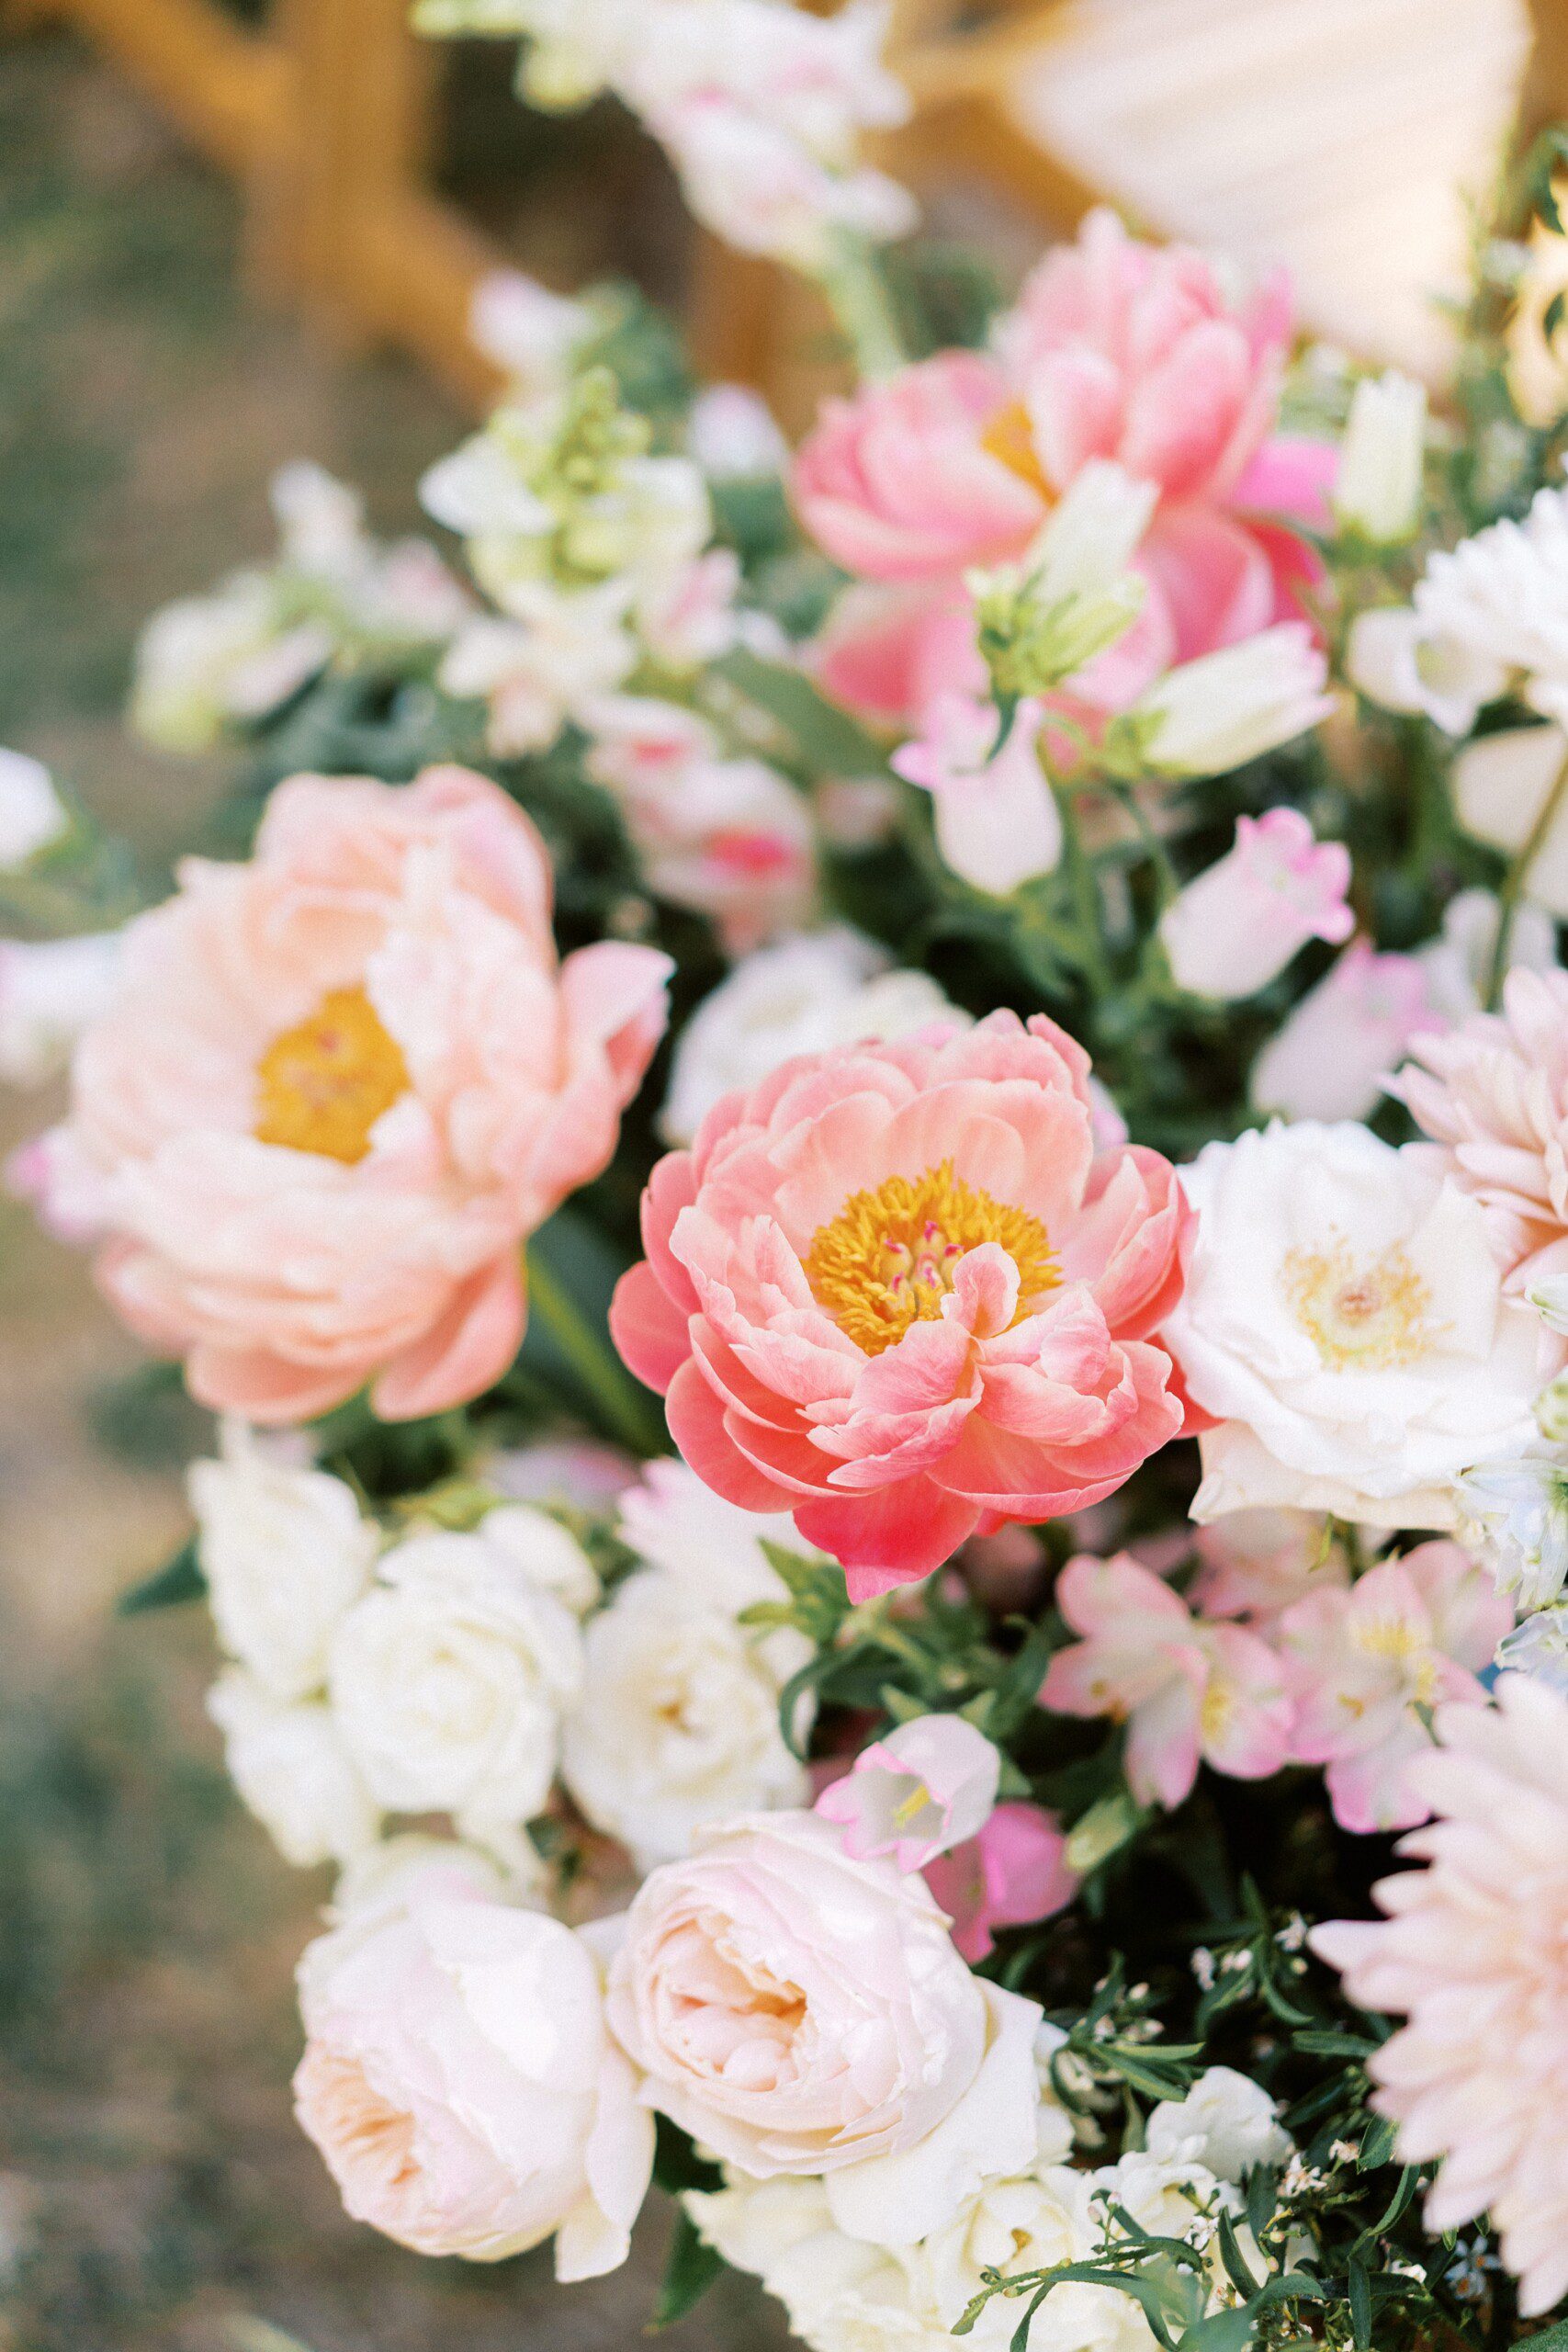 Stunning colorful peonies at a garden wedding in Newport RI